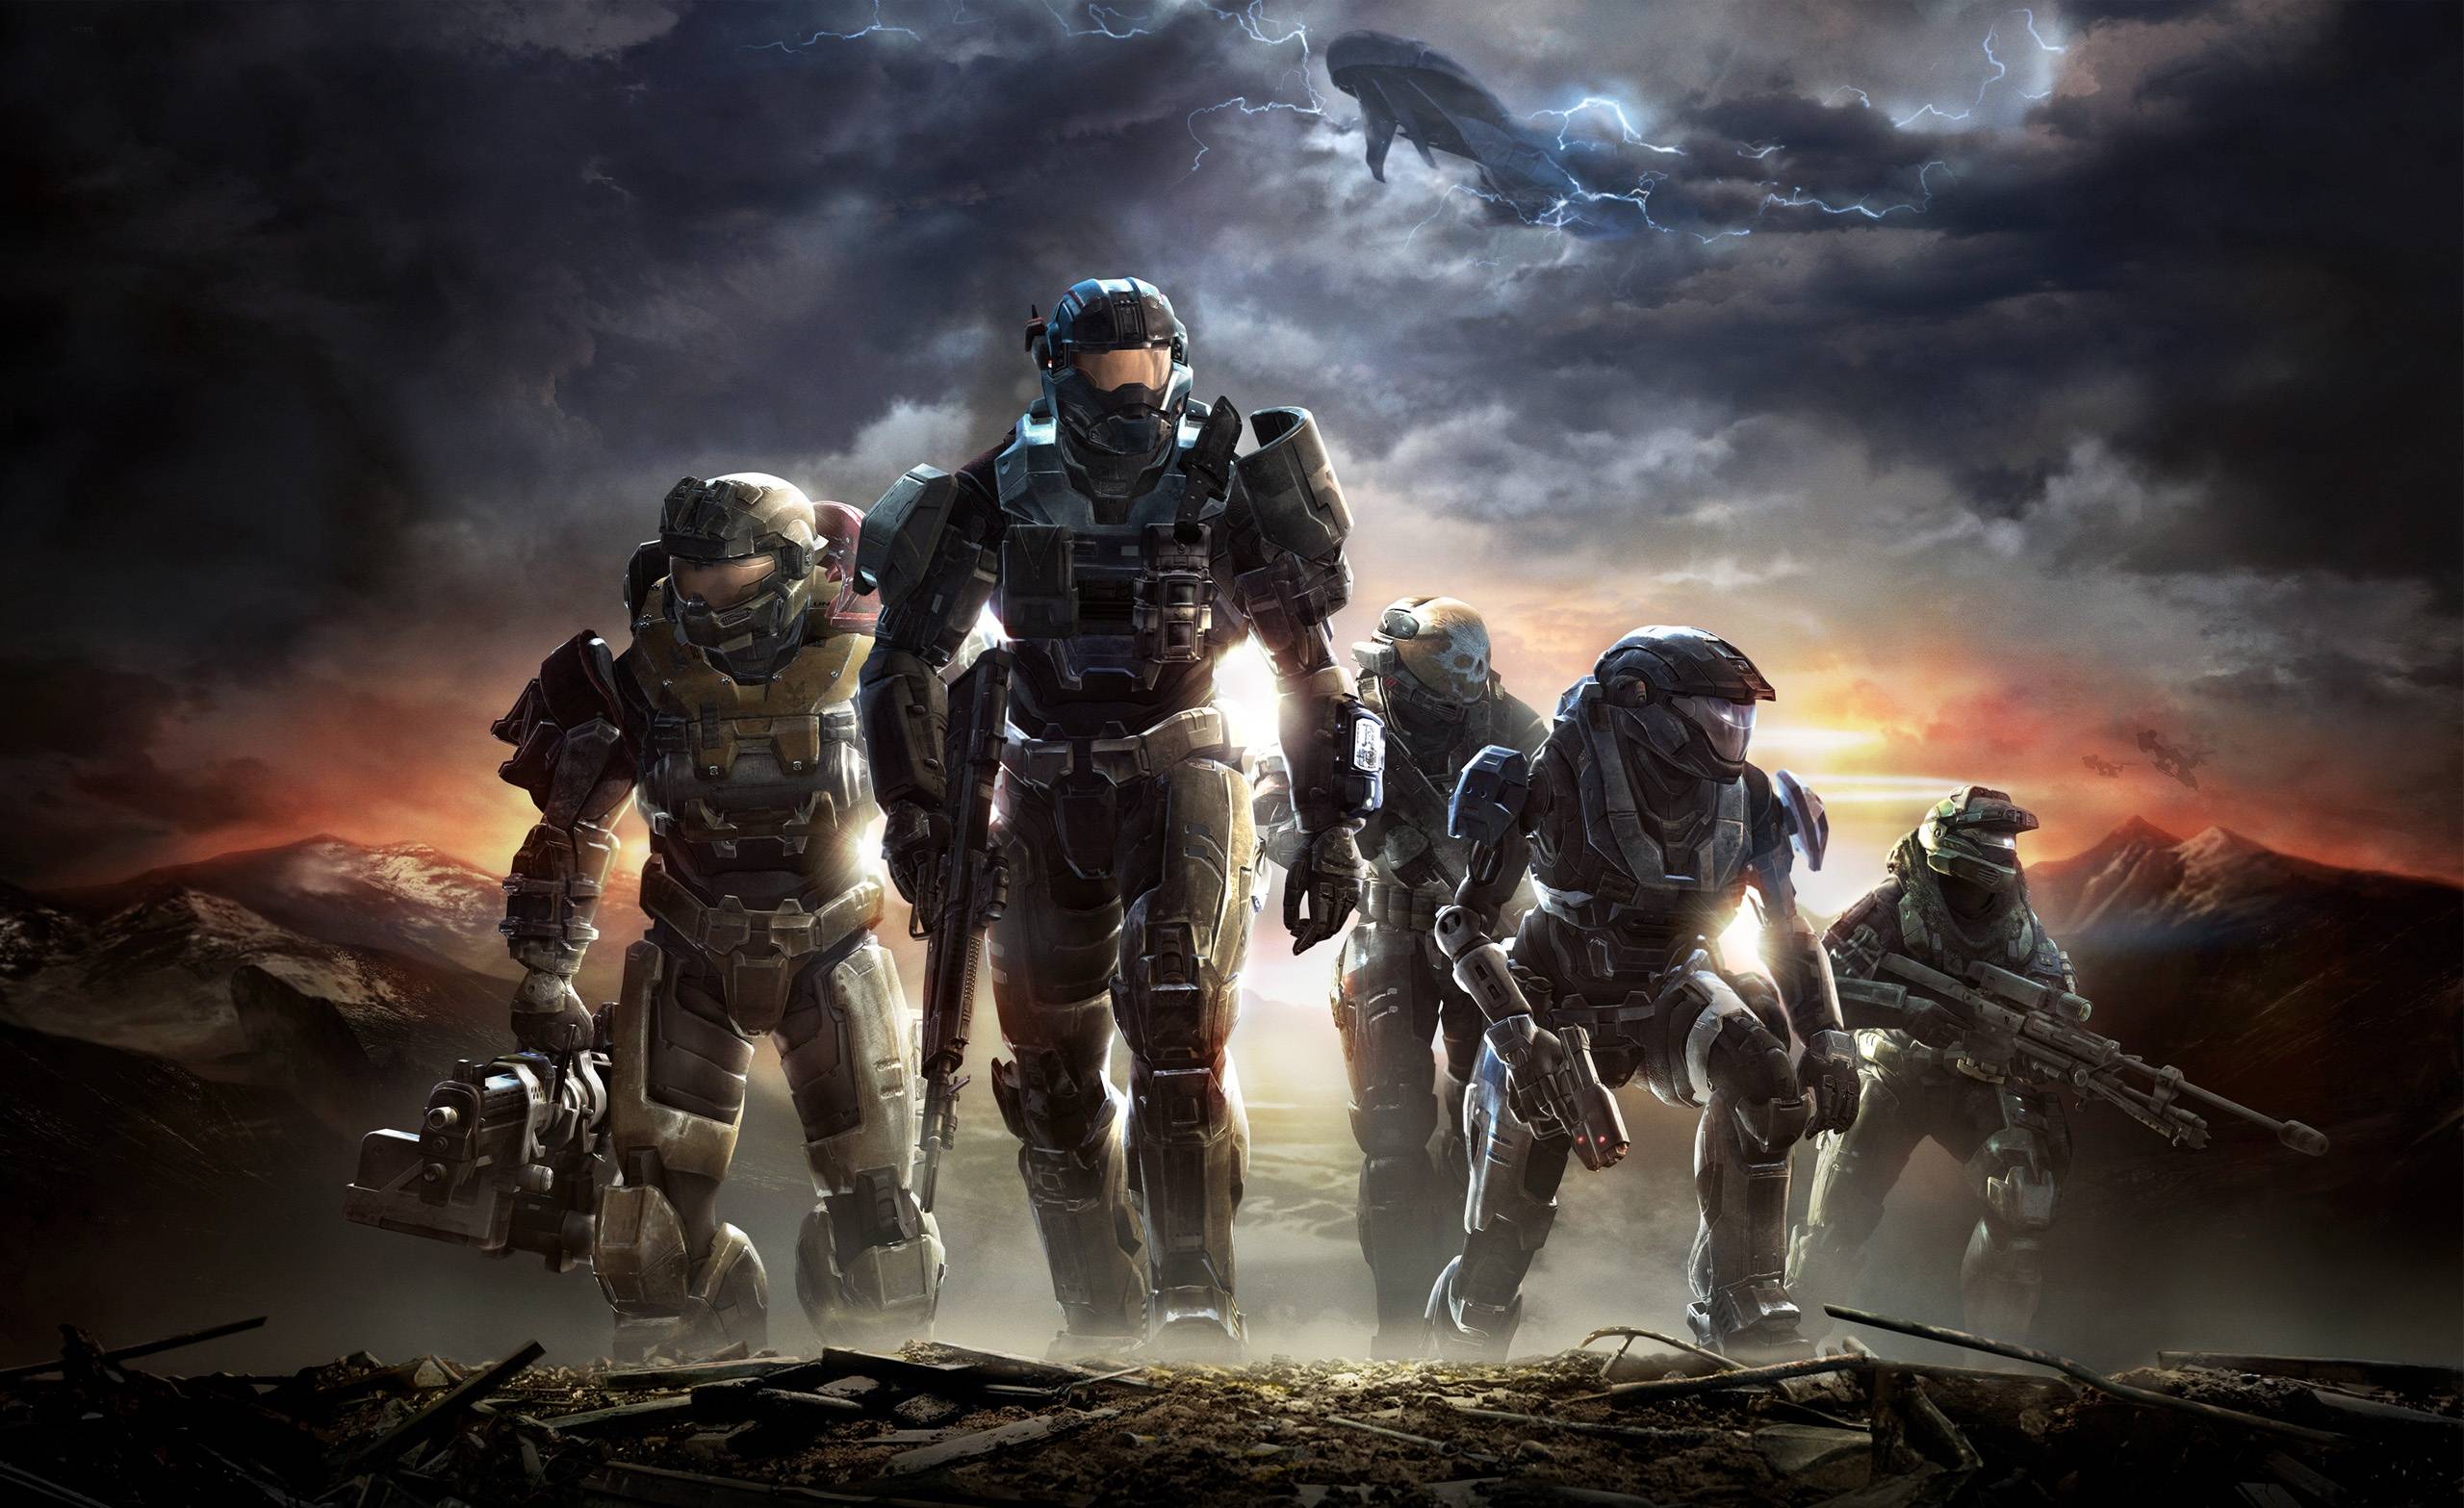 Halo Spartan Wallpapers - Top Free Halo